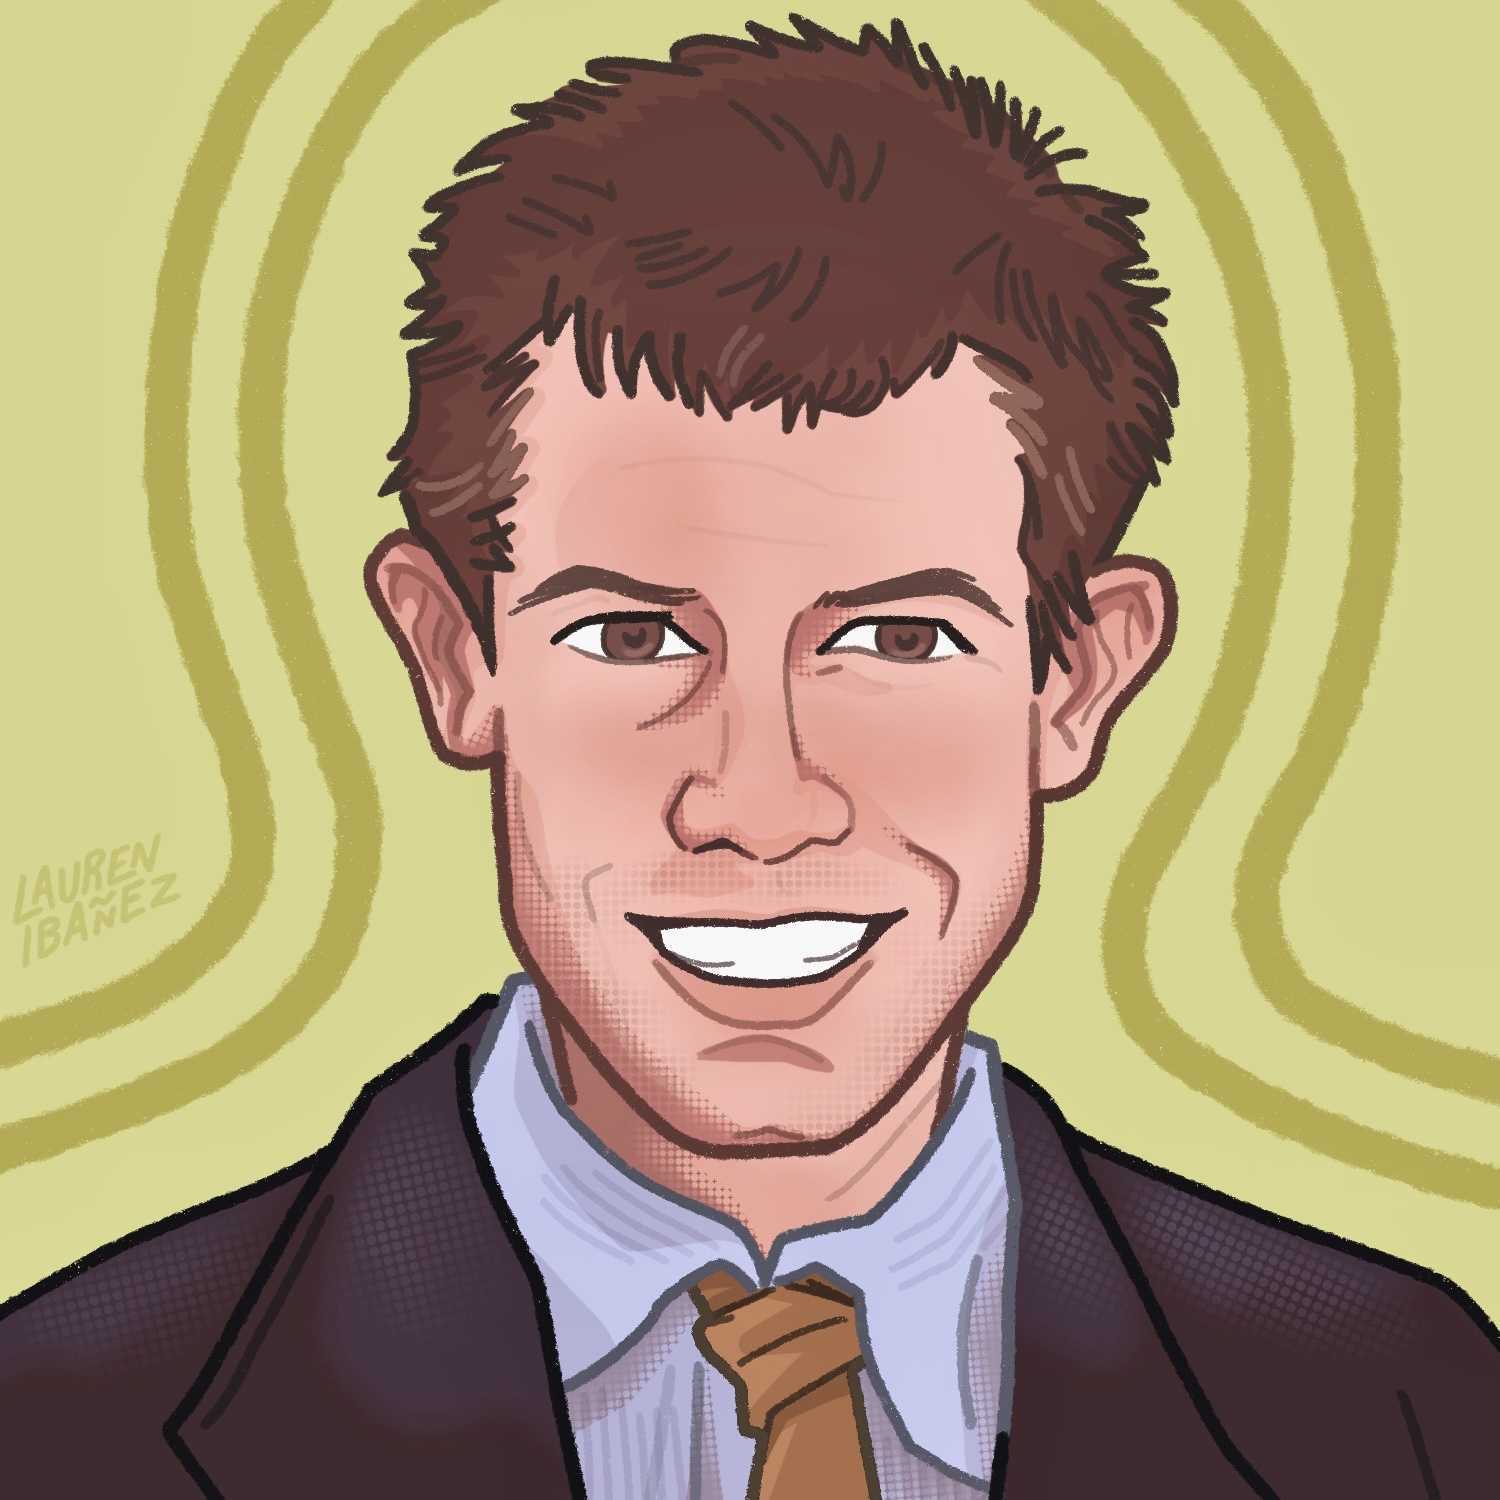 An illustrated headshot of Christopher Darché. He is looking toward the camera and smiling.